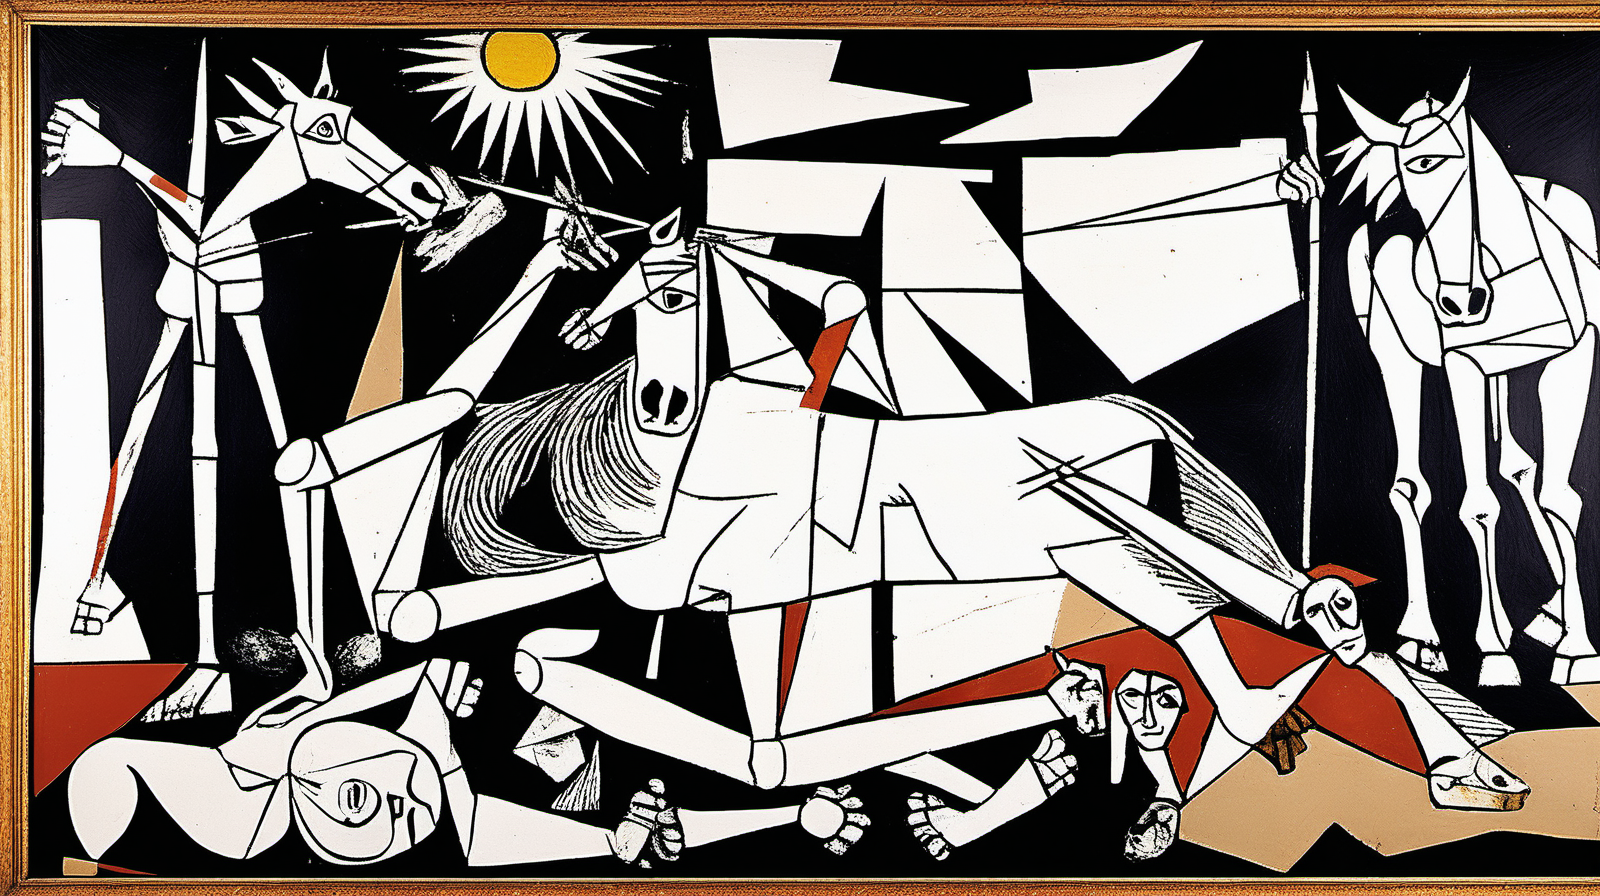 Picasso war painting scene from Guernica Spain cubist